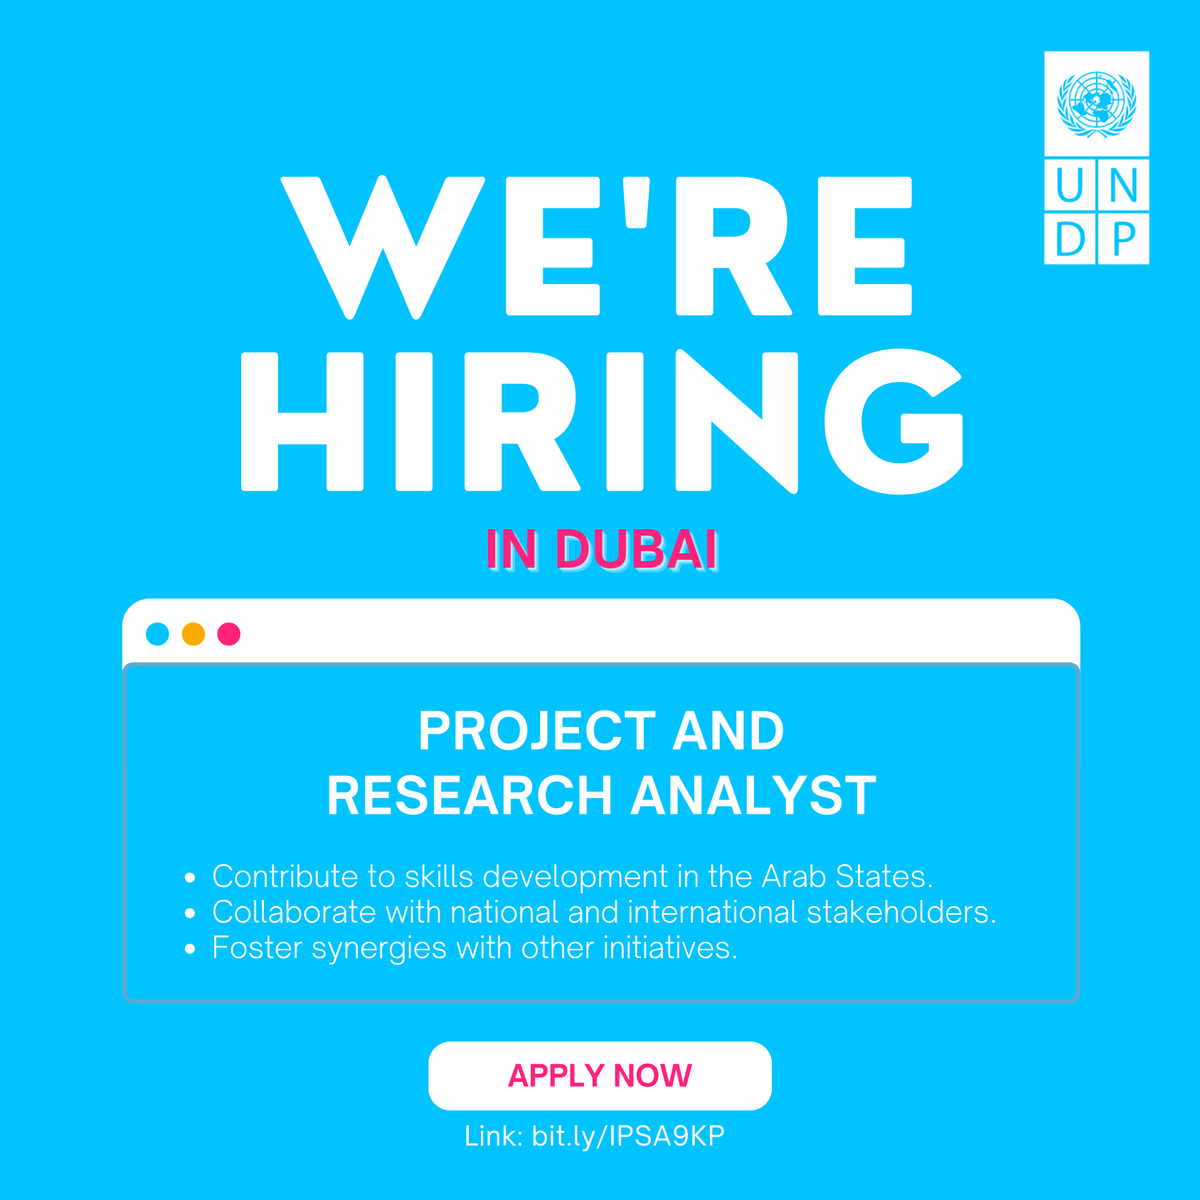 🌟 Join @UNDP in #Dubai as a Project and Research Analyst! Drive the impactful #FutureSkills4All initiative in the #Arab region. 📚🌍 Apply by 7 April: bit.ly/IPSA9KP Fluent English and Arabic required, French a plus. #UNDPJobs #DubaiOpportunity #ApplyNow